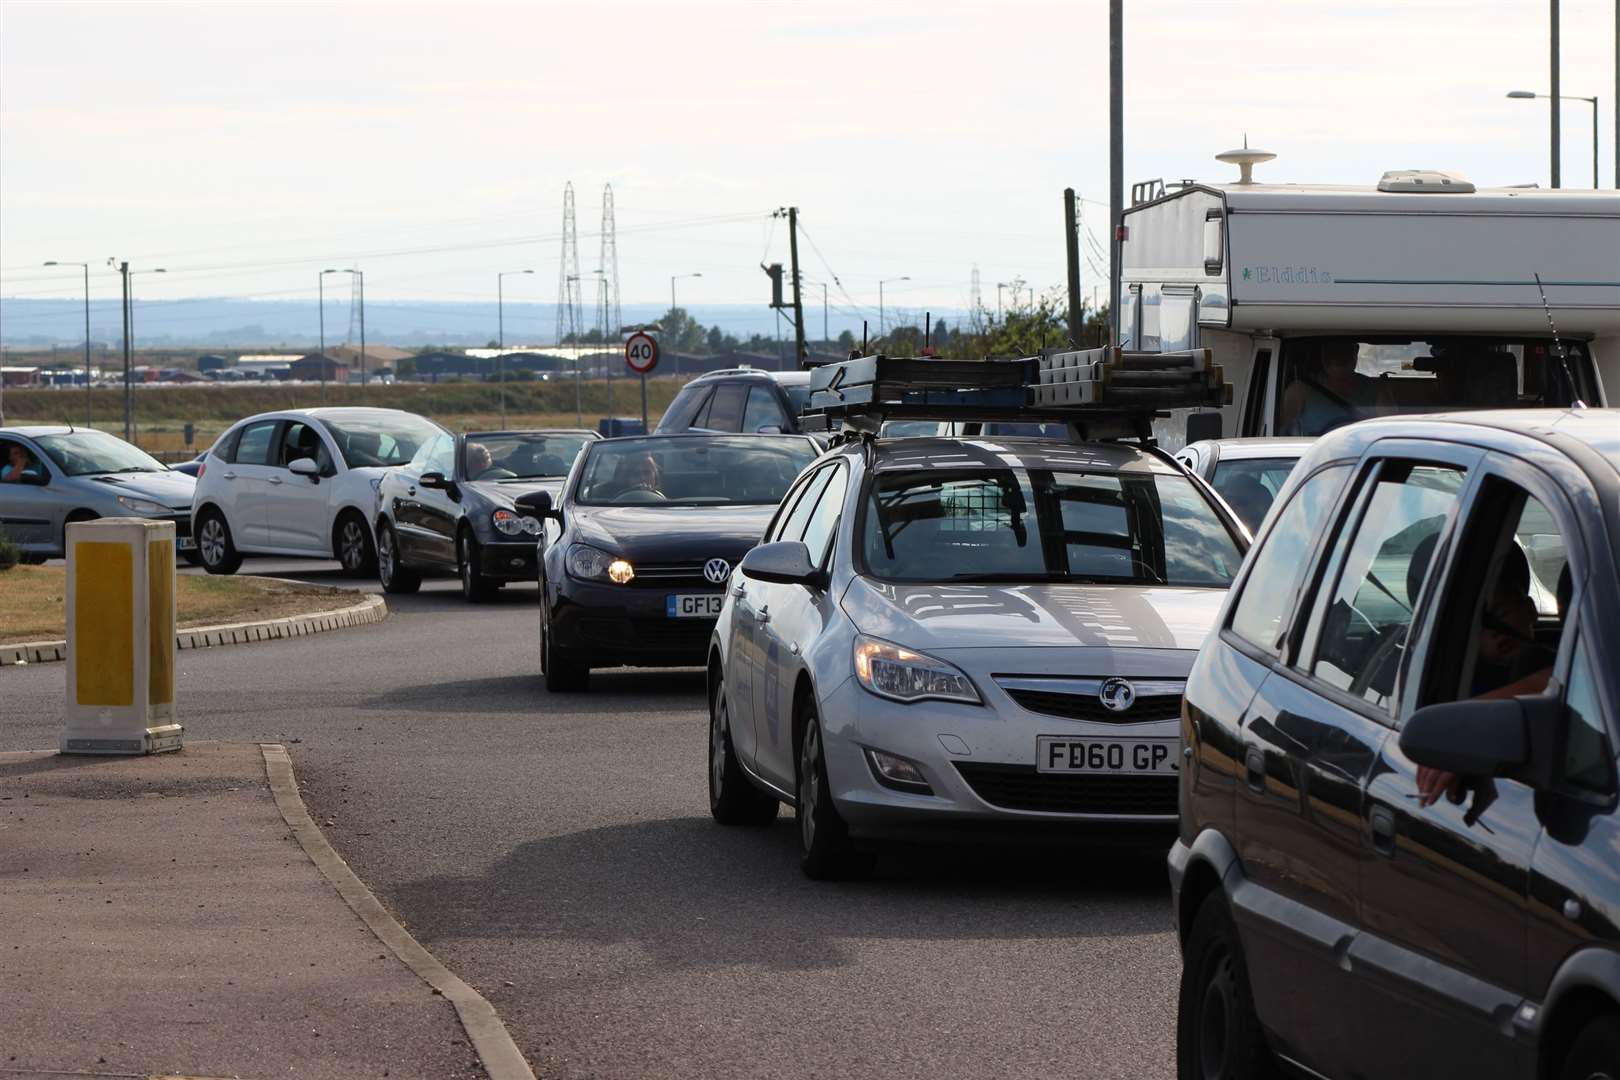 Traffic at Cowstead Corner roundabout, A249, Sheppey